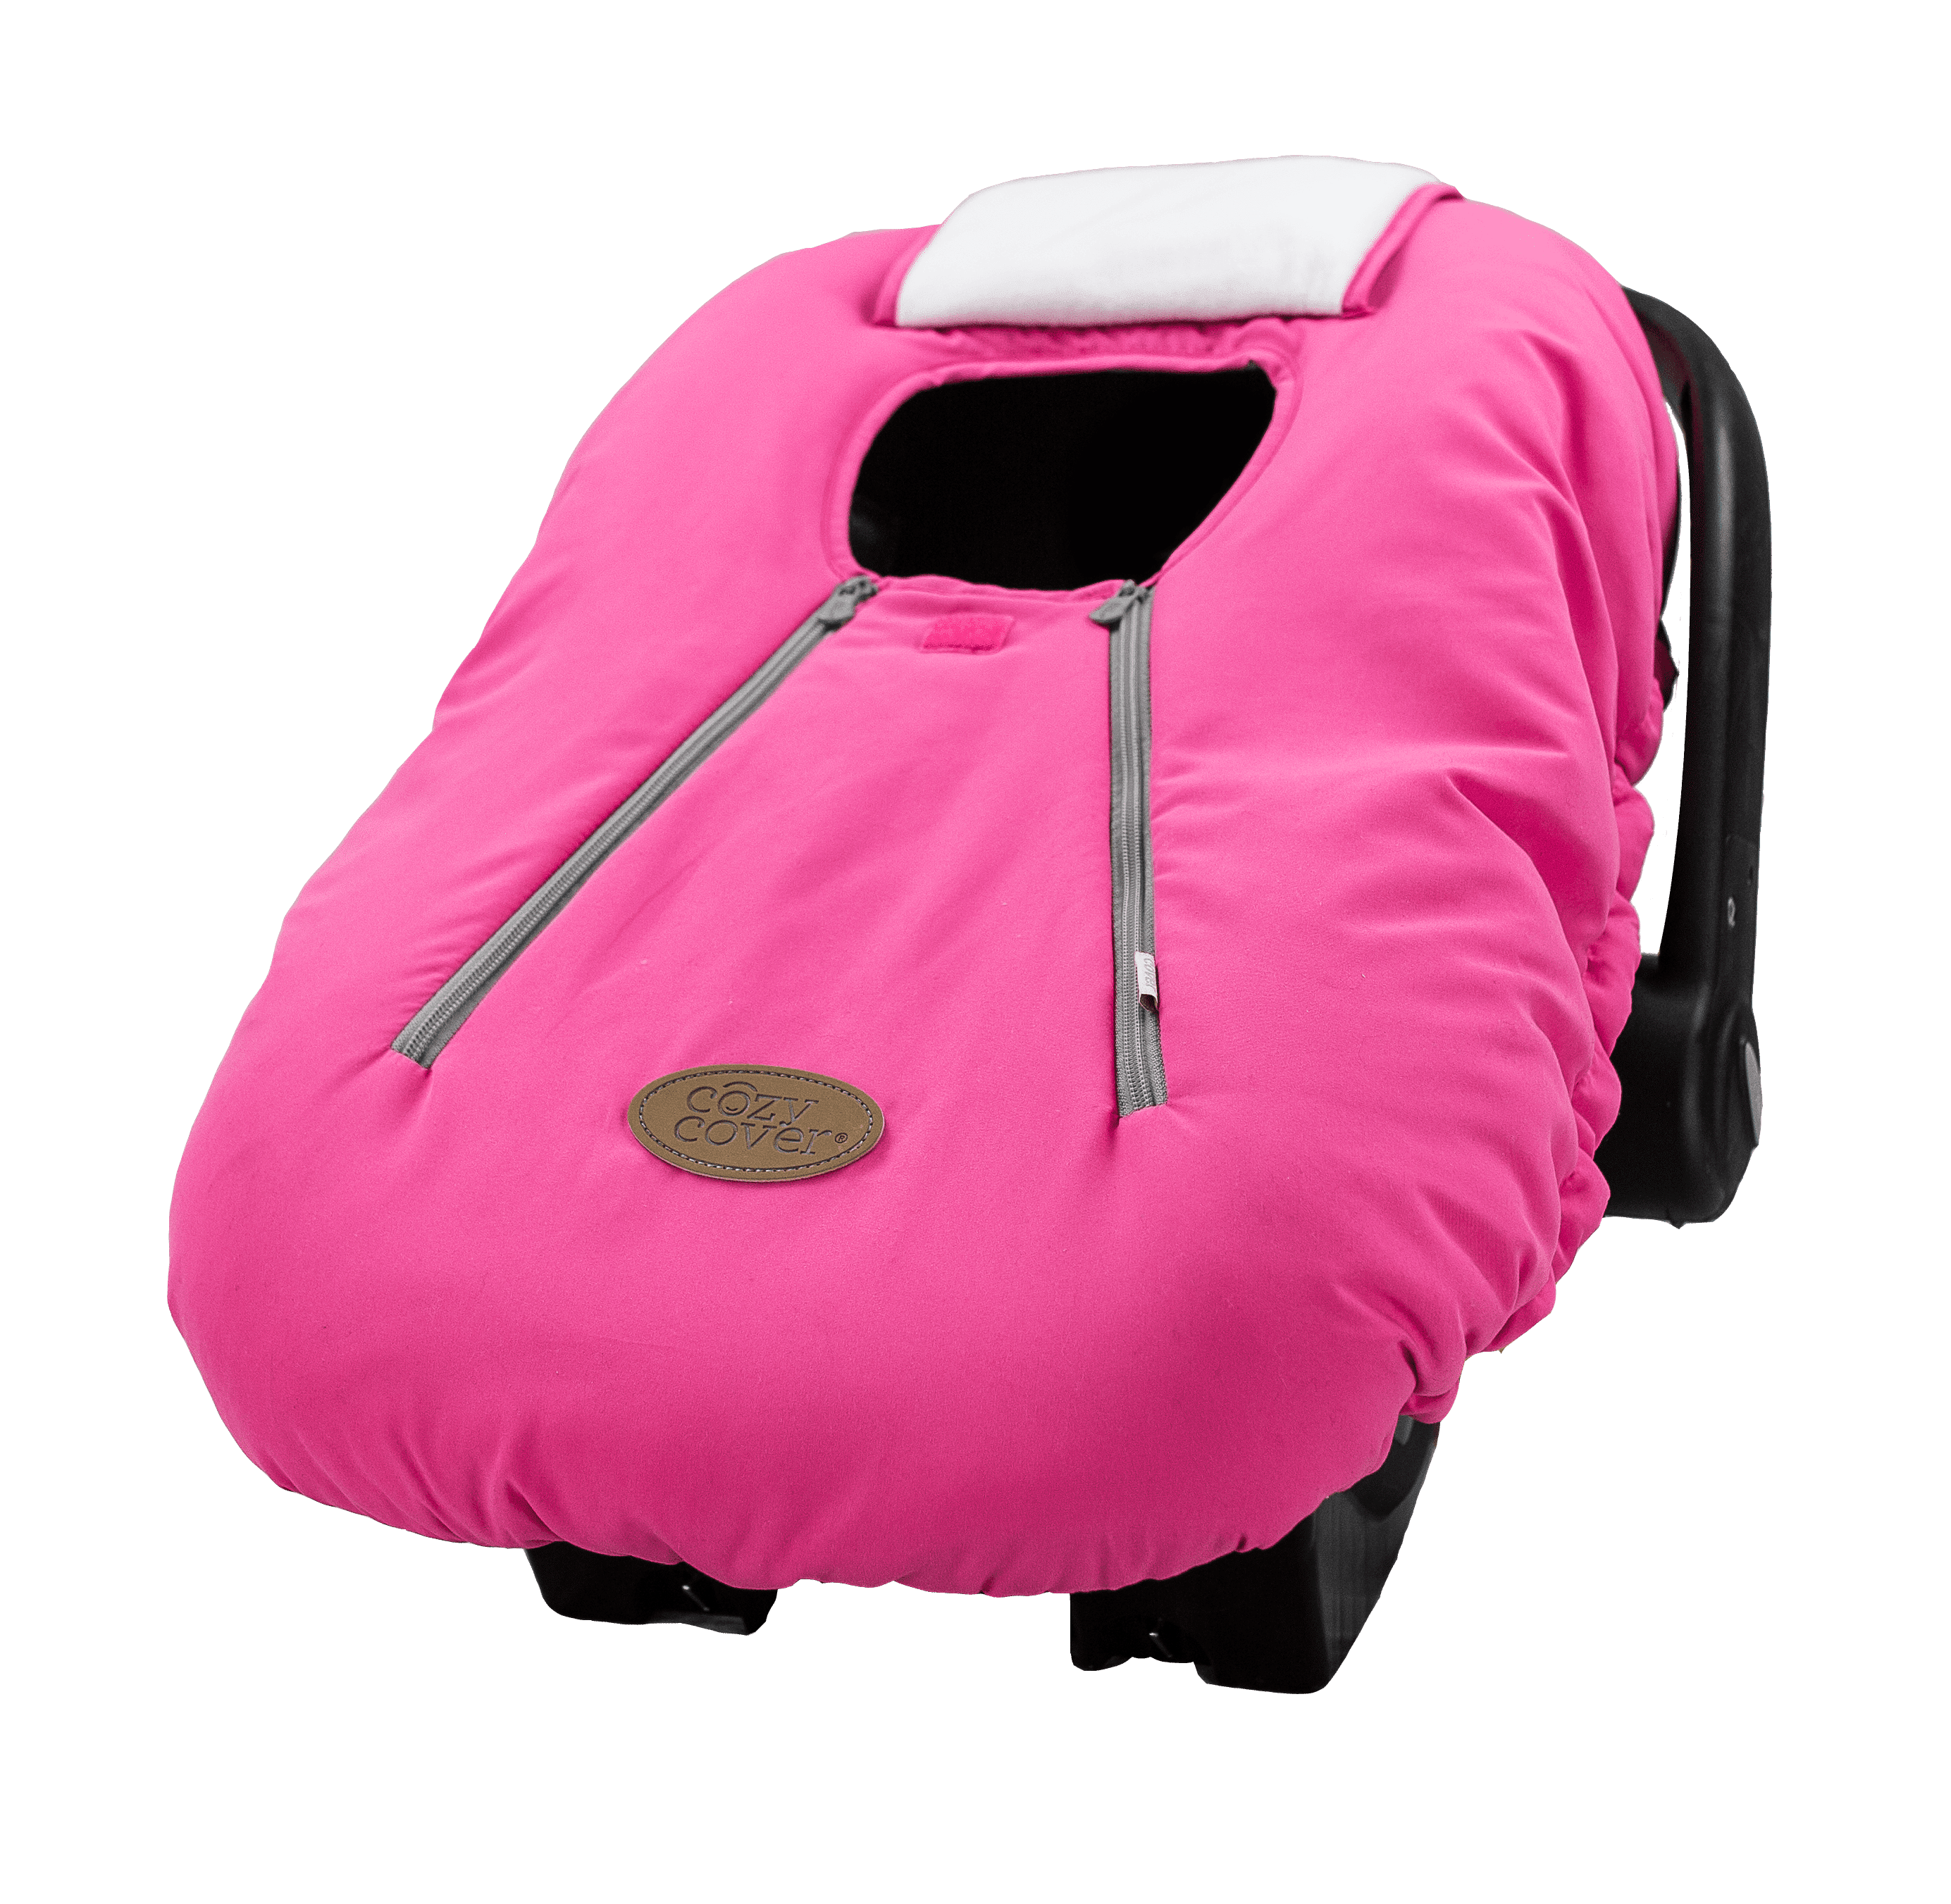 Baby Car Seat Covers Pink Free, Colorful Baby Car Seat Covers